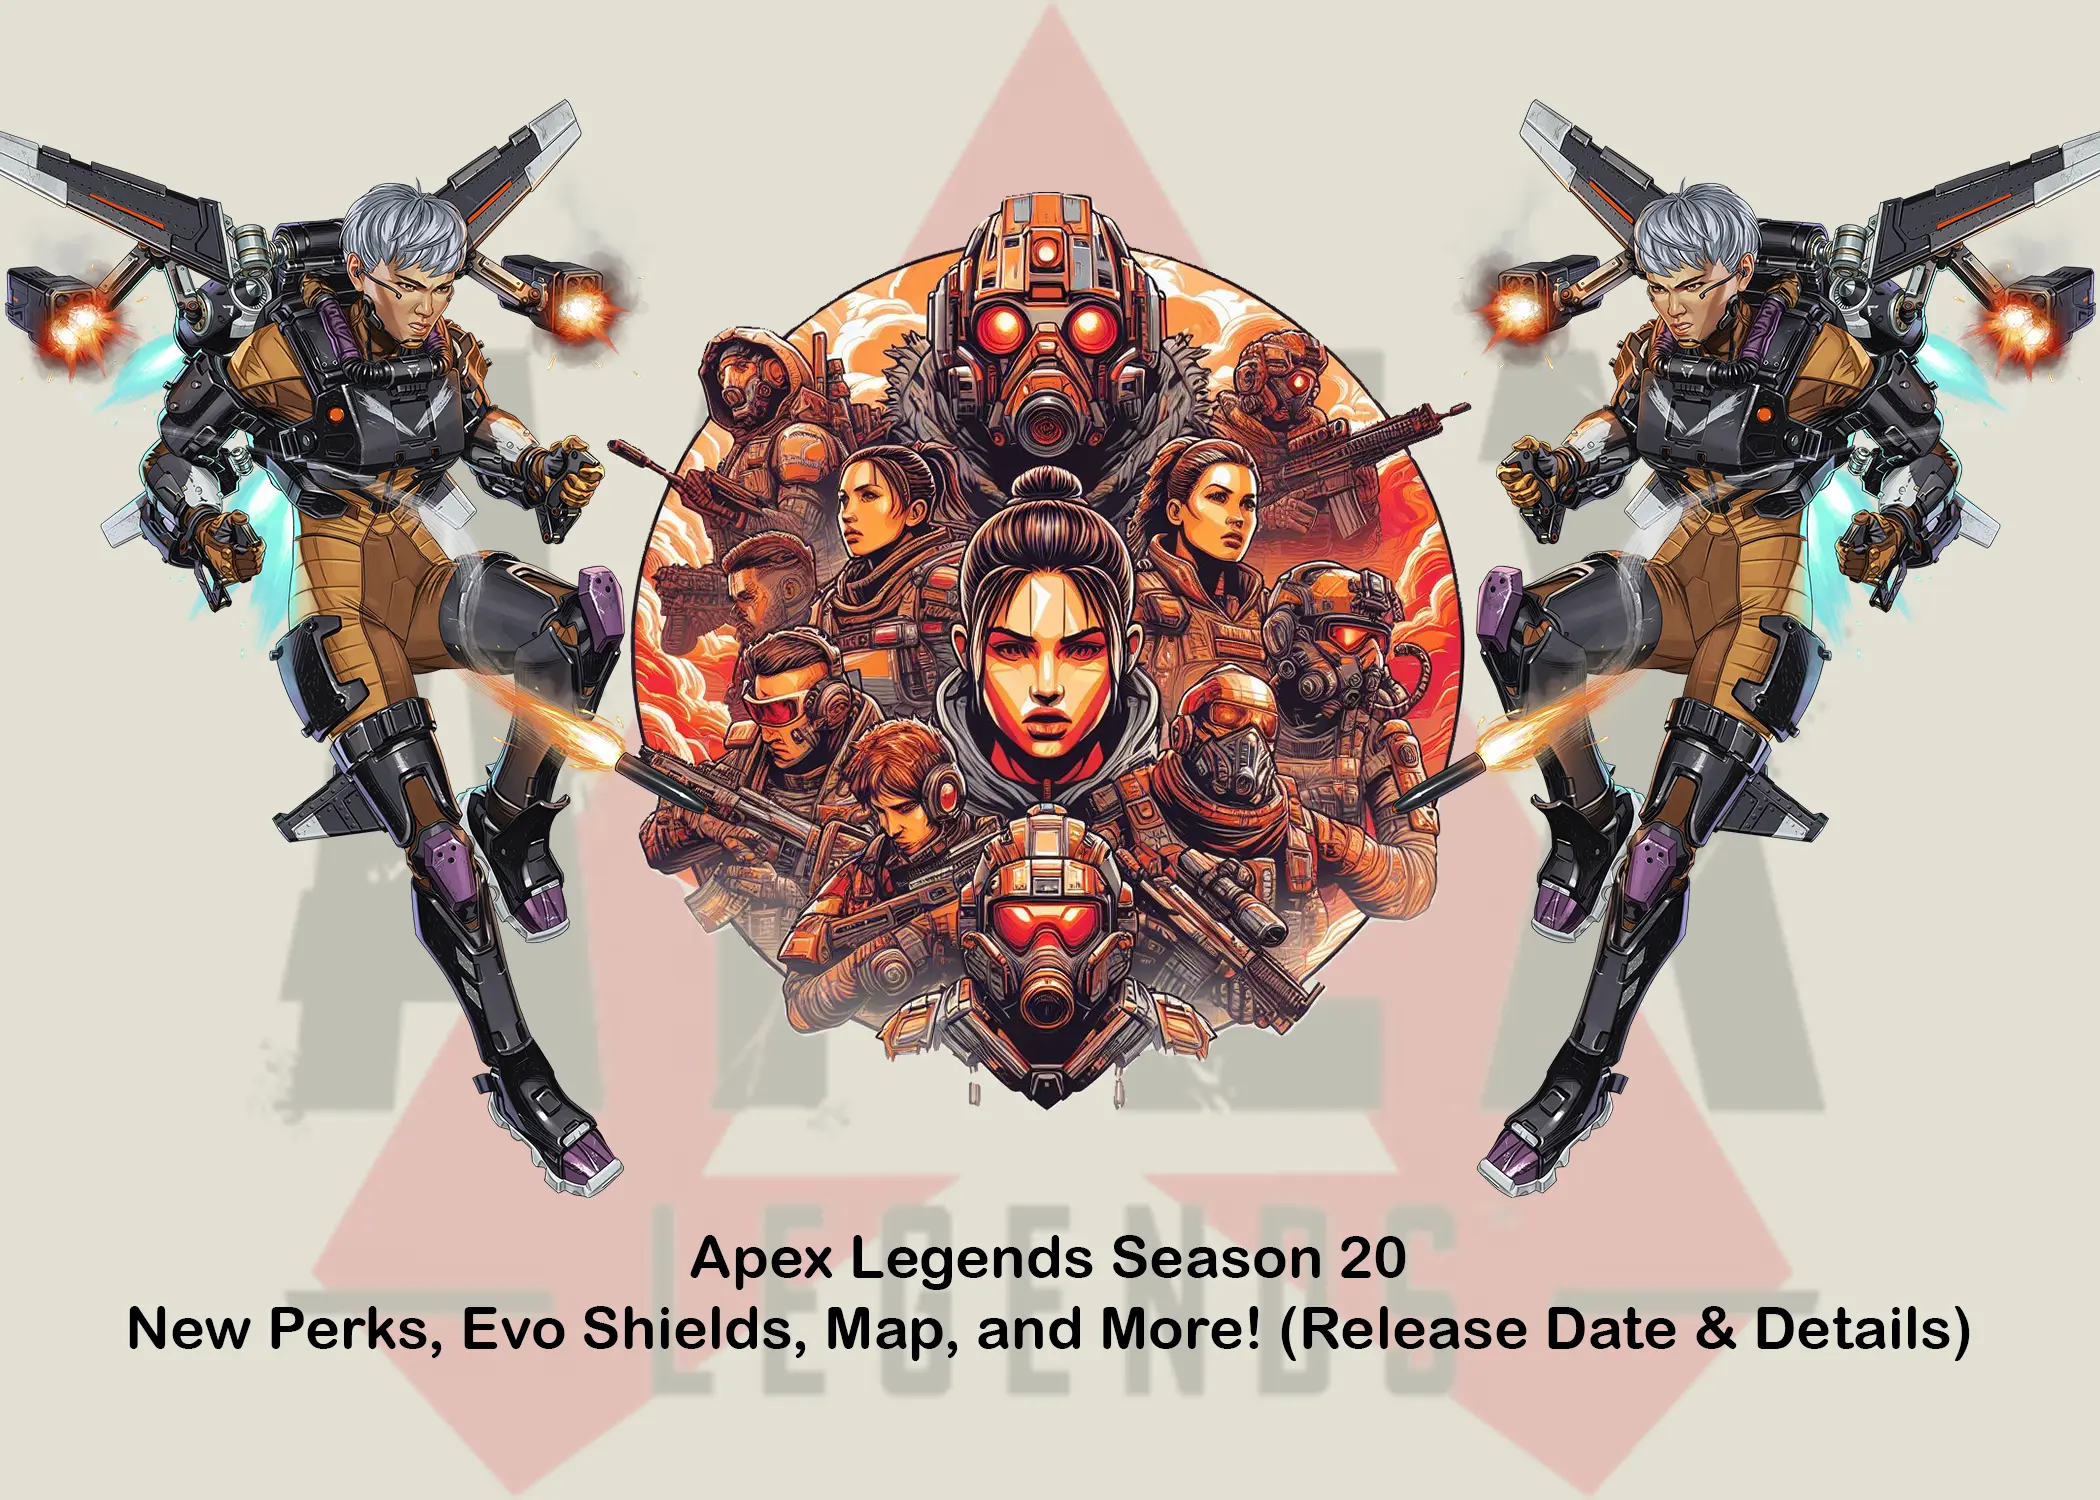 Apex Legends Season 20: New Perks, Evo Shields, Map, and More! (Release Date & Details)